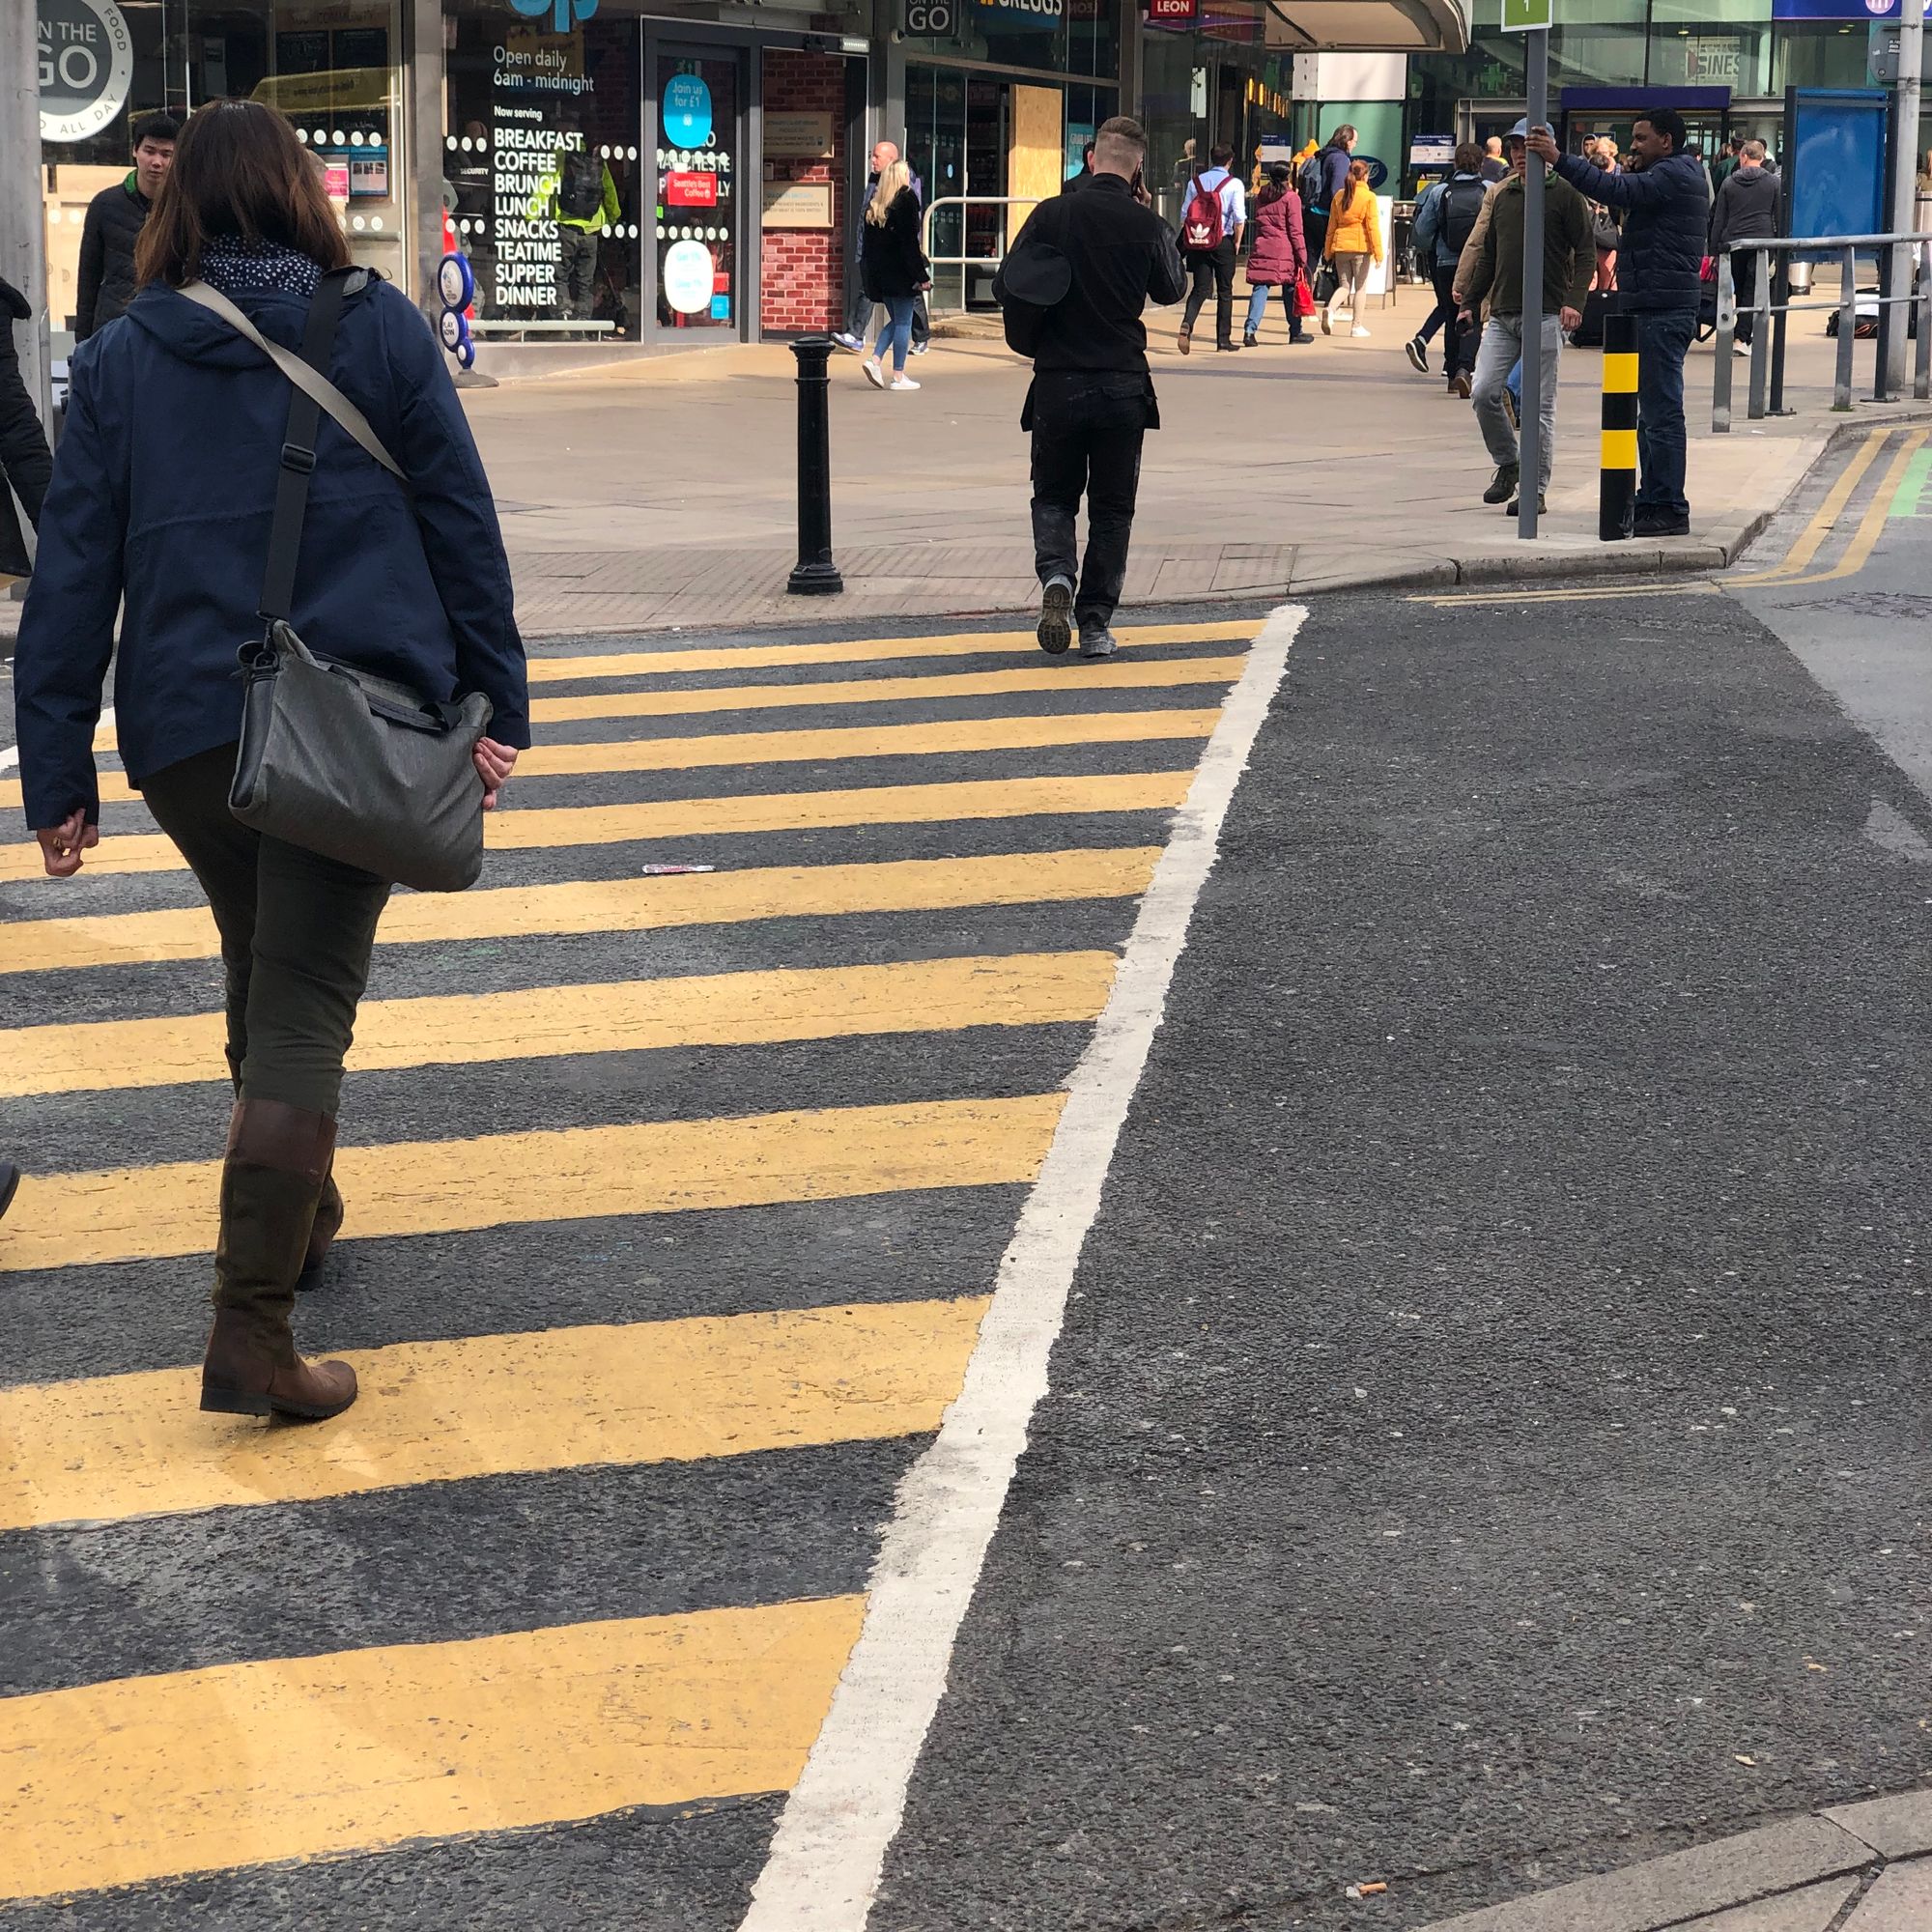 A road crossing marked with oblong tactile paving and black and yellow stripes.